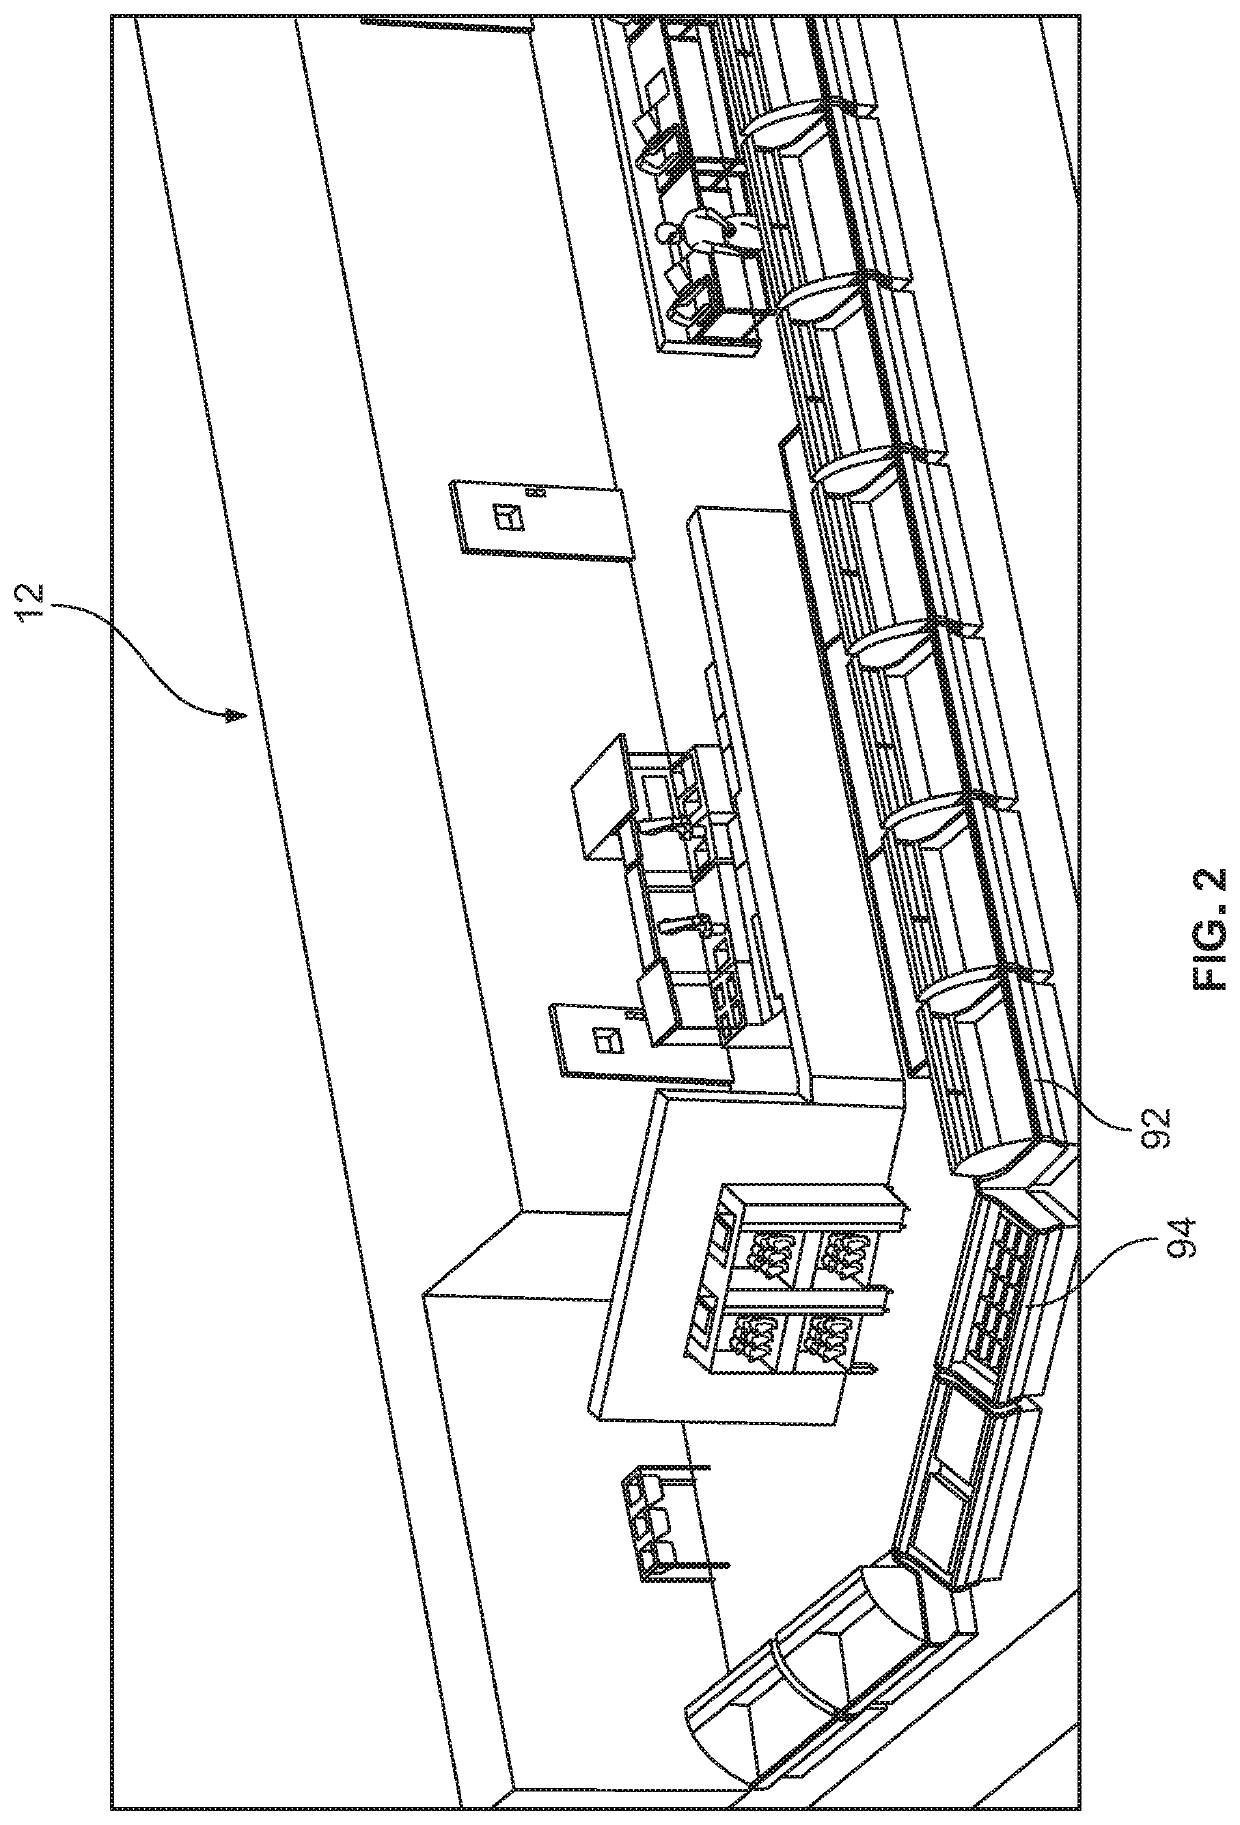 Modular robotic food preparation system and related methods